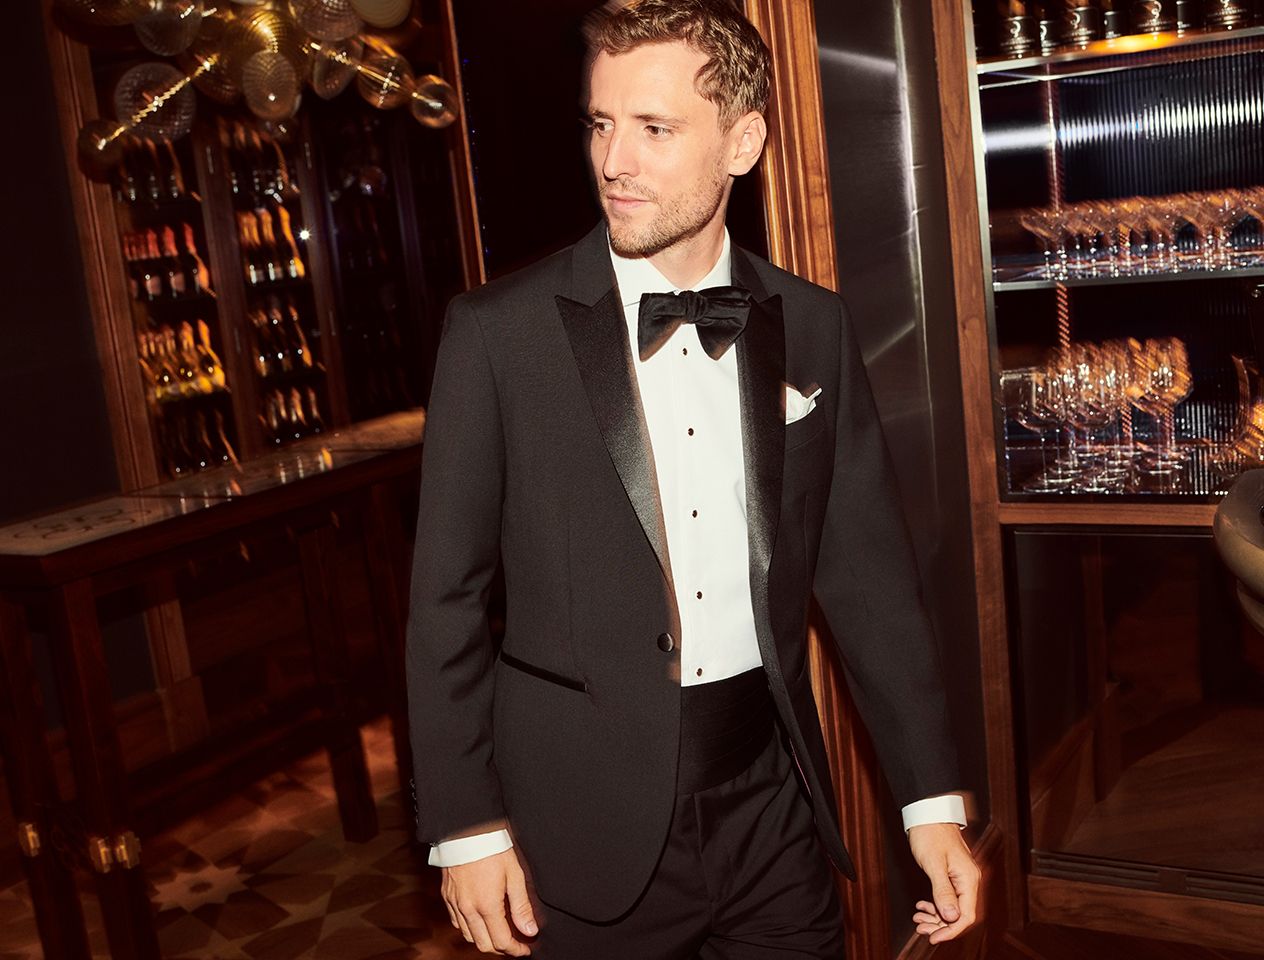 How to help your tuxedo stand out